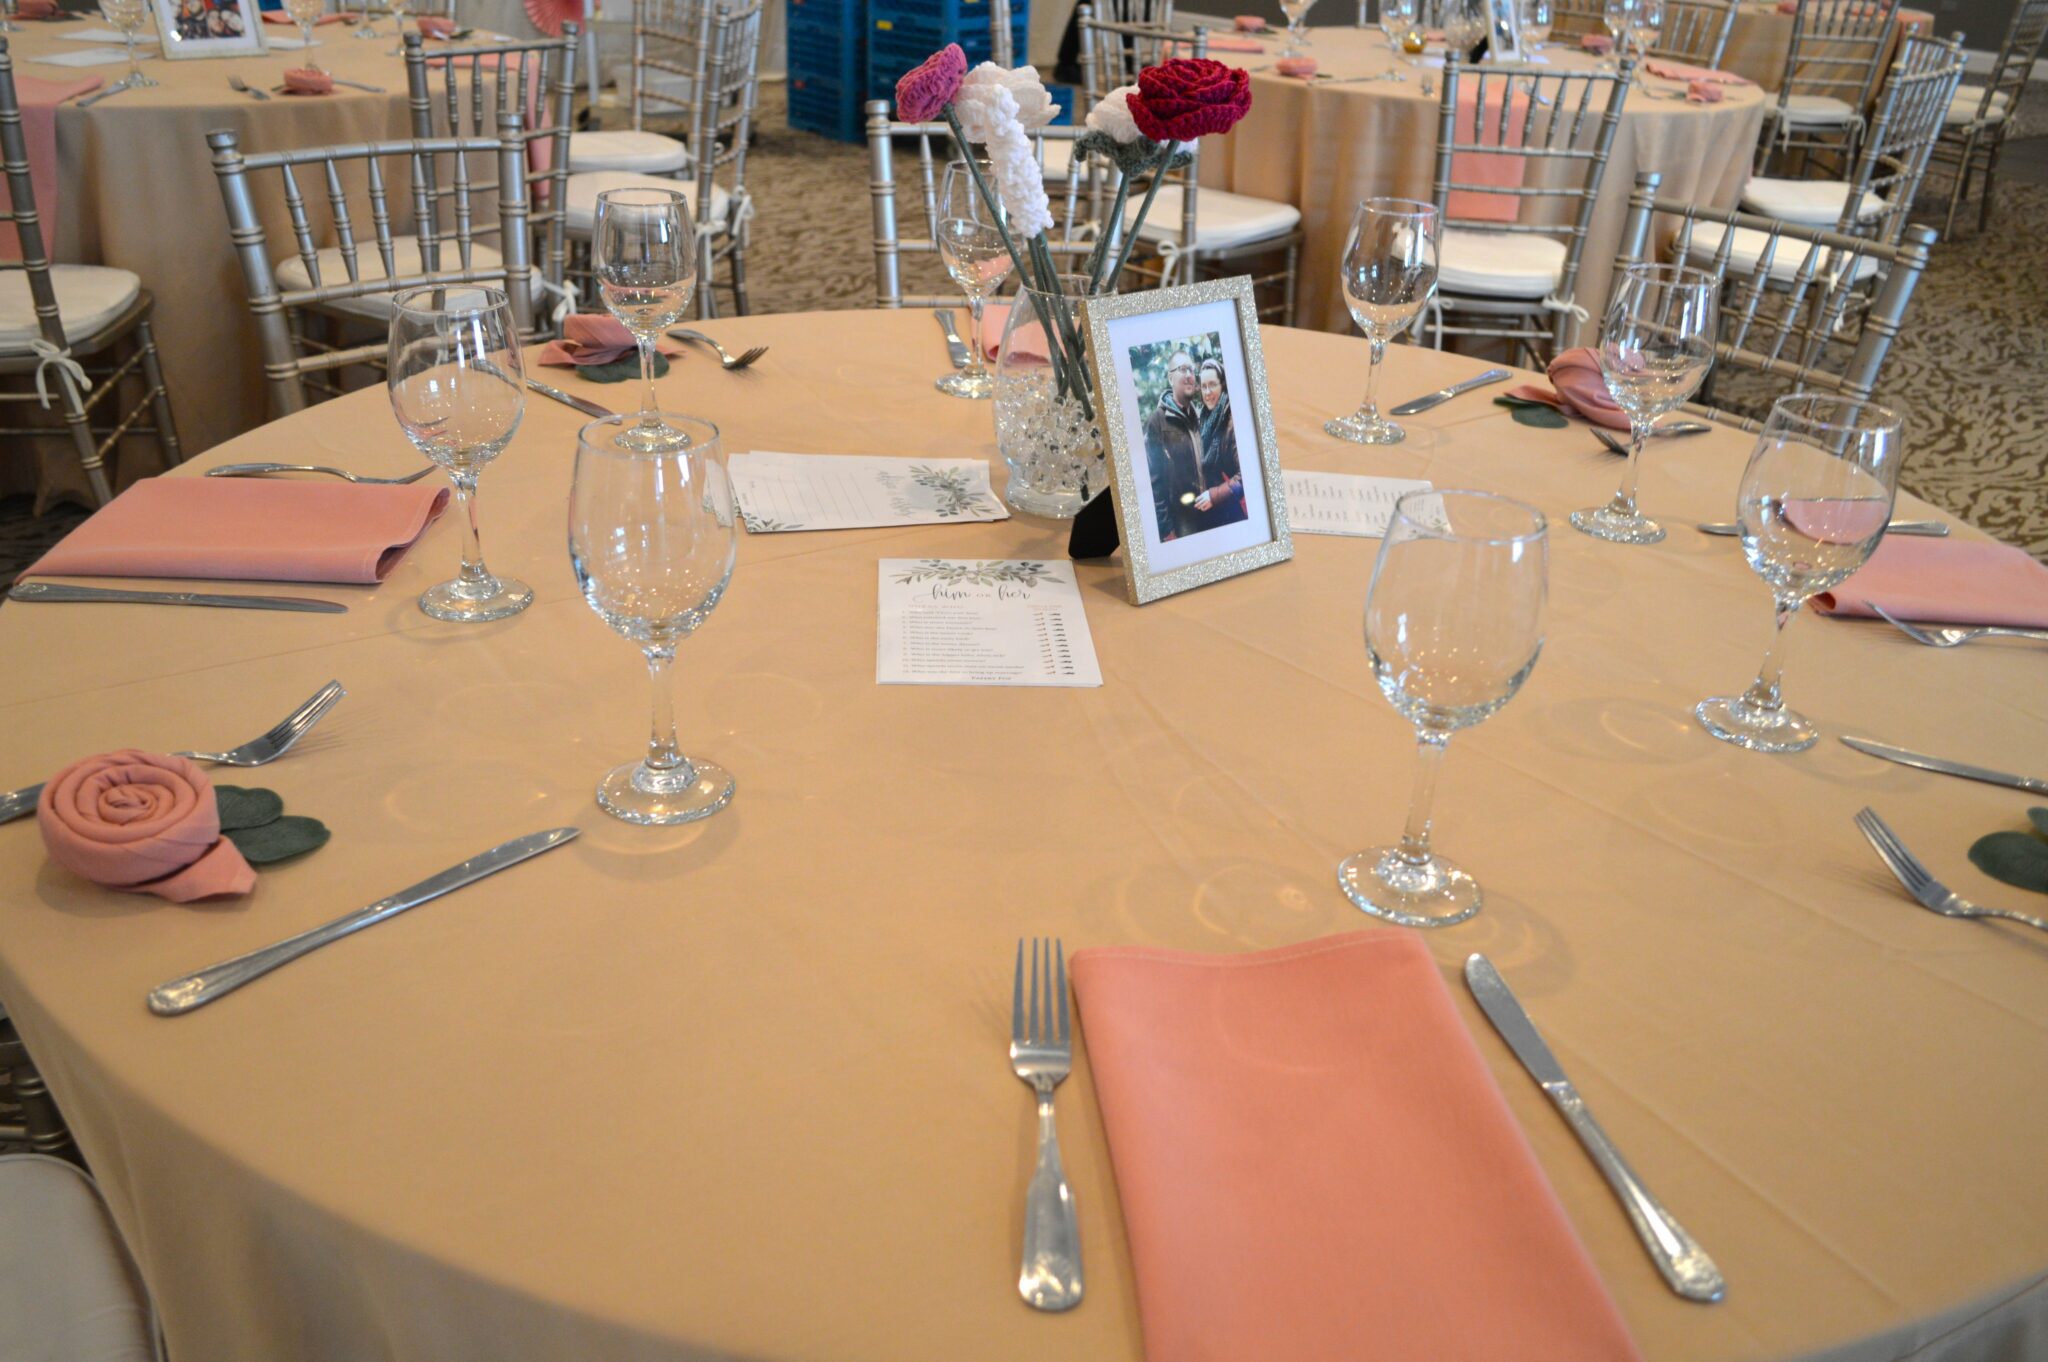 Round table set up with an ivory tablecloth and pink linens. napkins are folded in the shape of roses and centerpieces include crocheted flowers. 